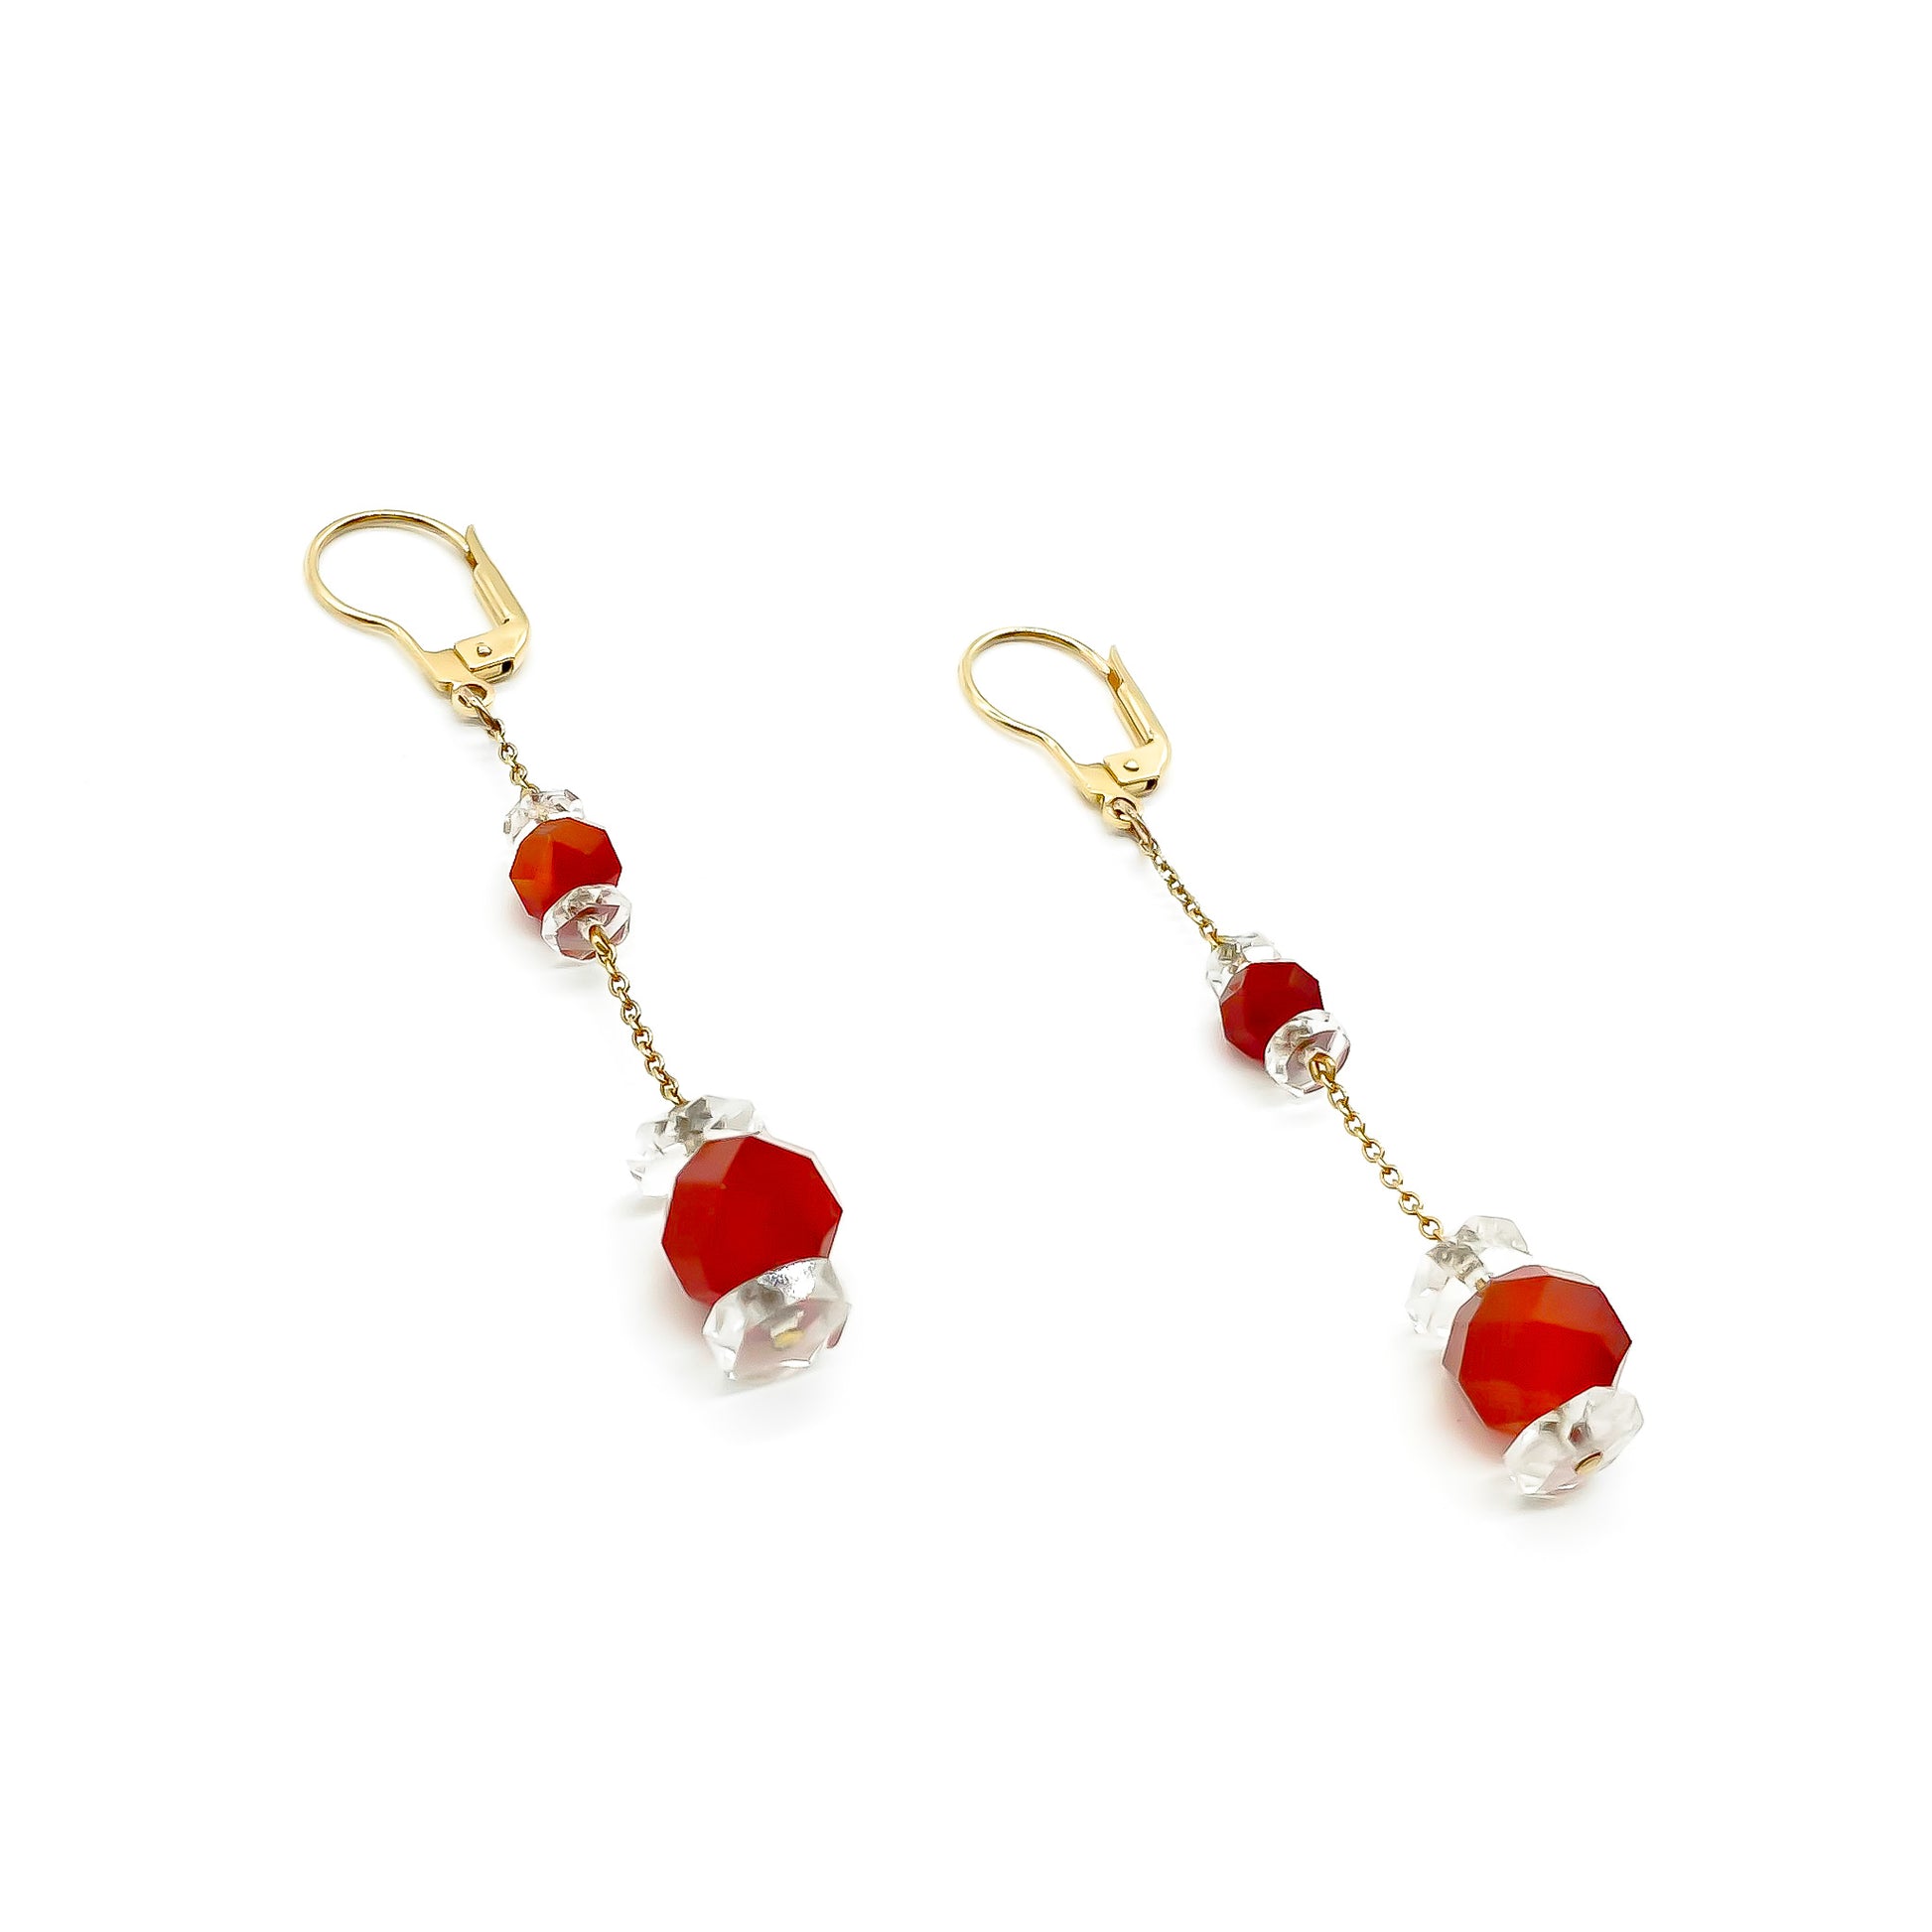 Pretty 18ct yellow gold dangling earrings with beautifully faceted carnelian and rock crystal beads. Circa 1930’s